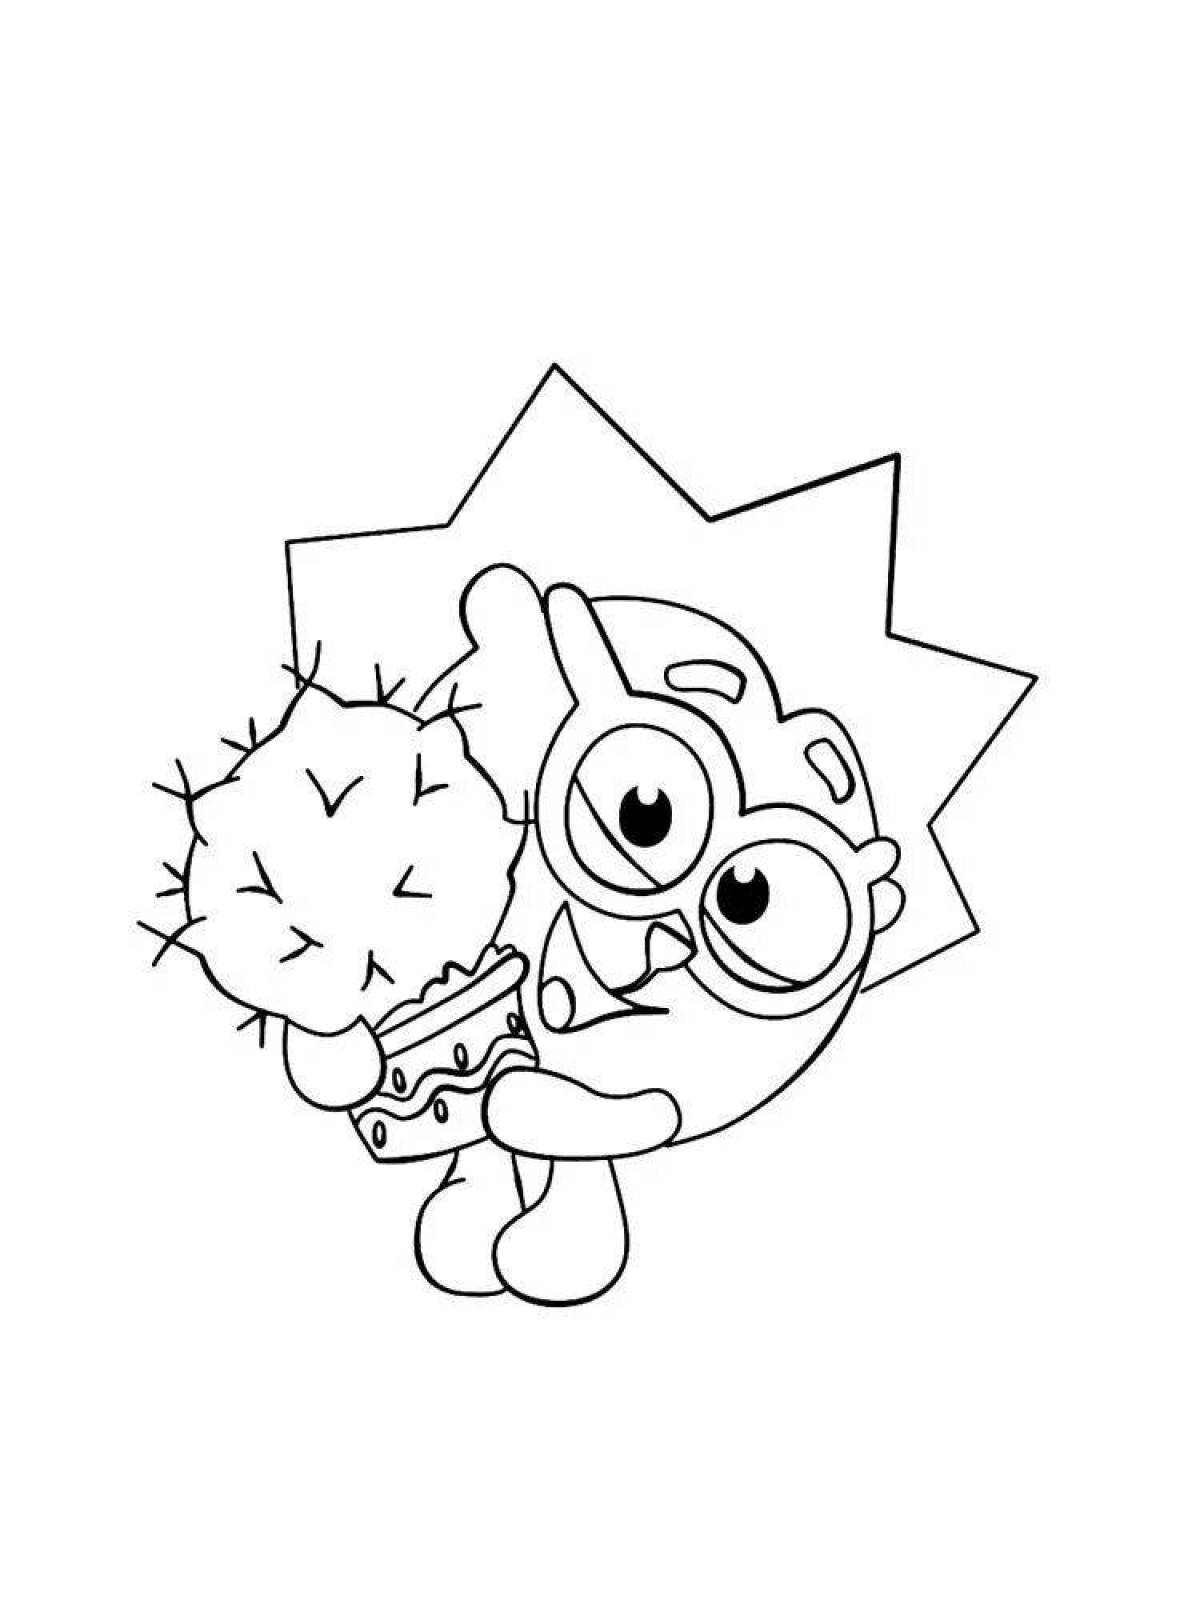 Coloring book funny baby and hedgehog